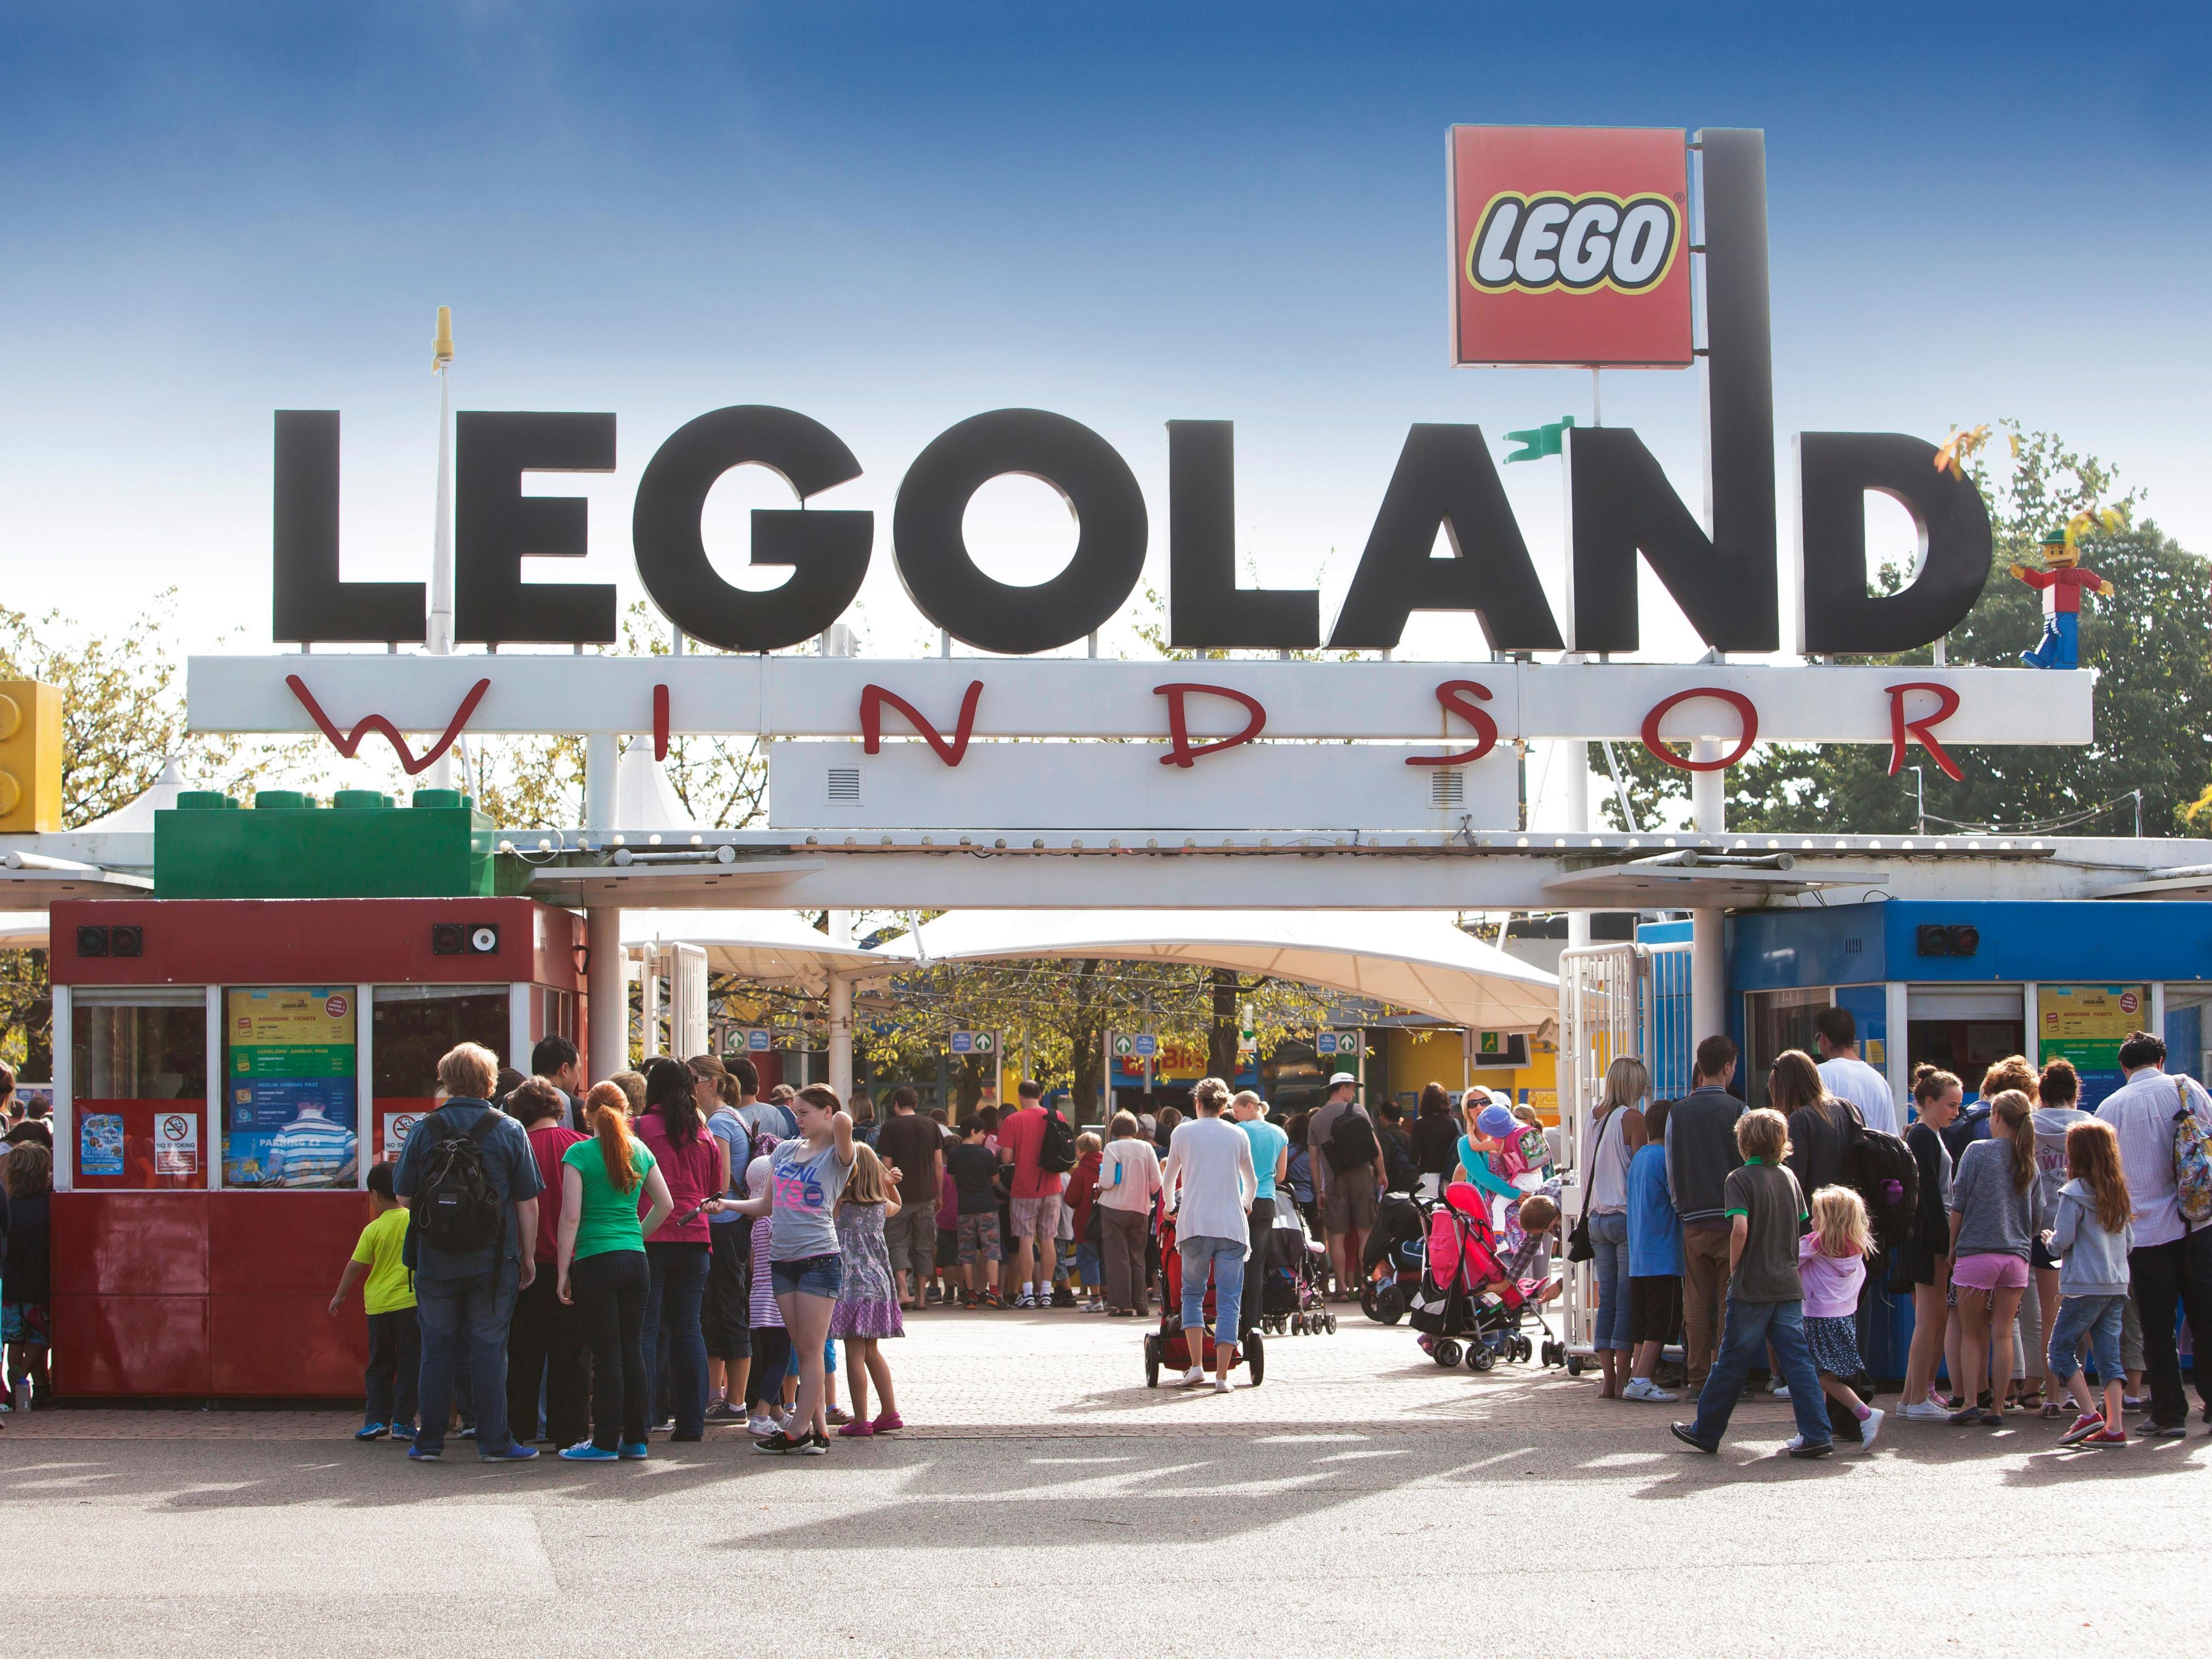 LEGOLAND Windsor- located 4 miles from Holiday Inn Express Slough